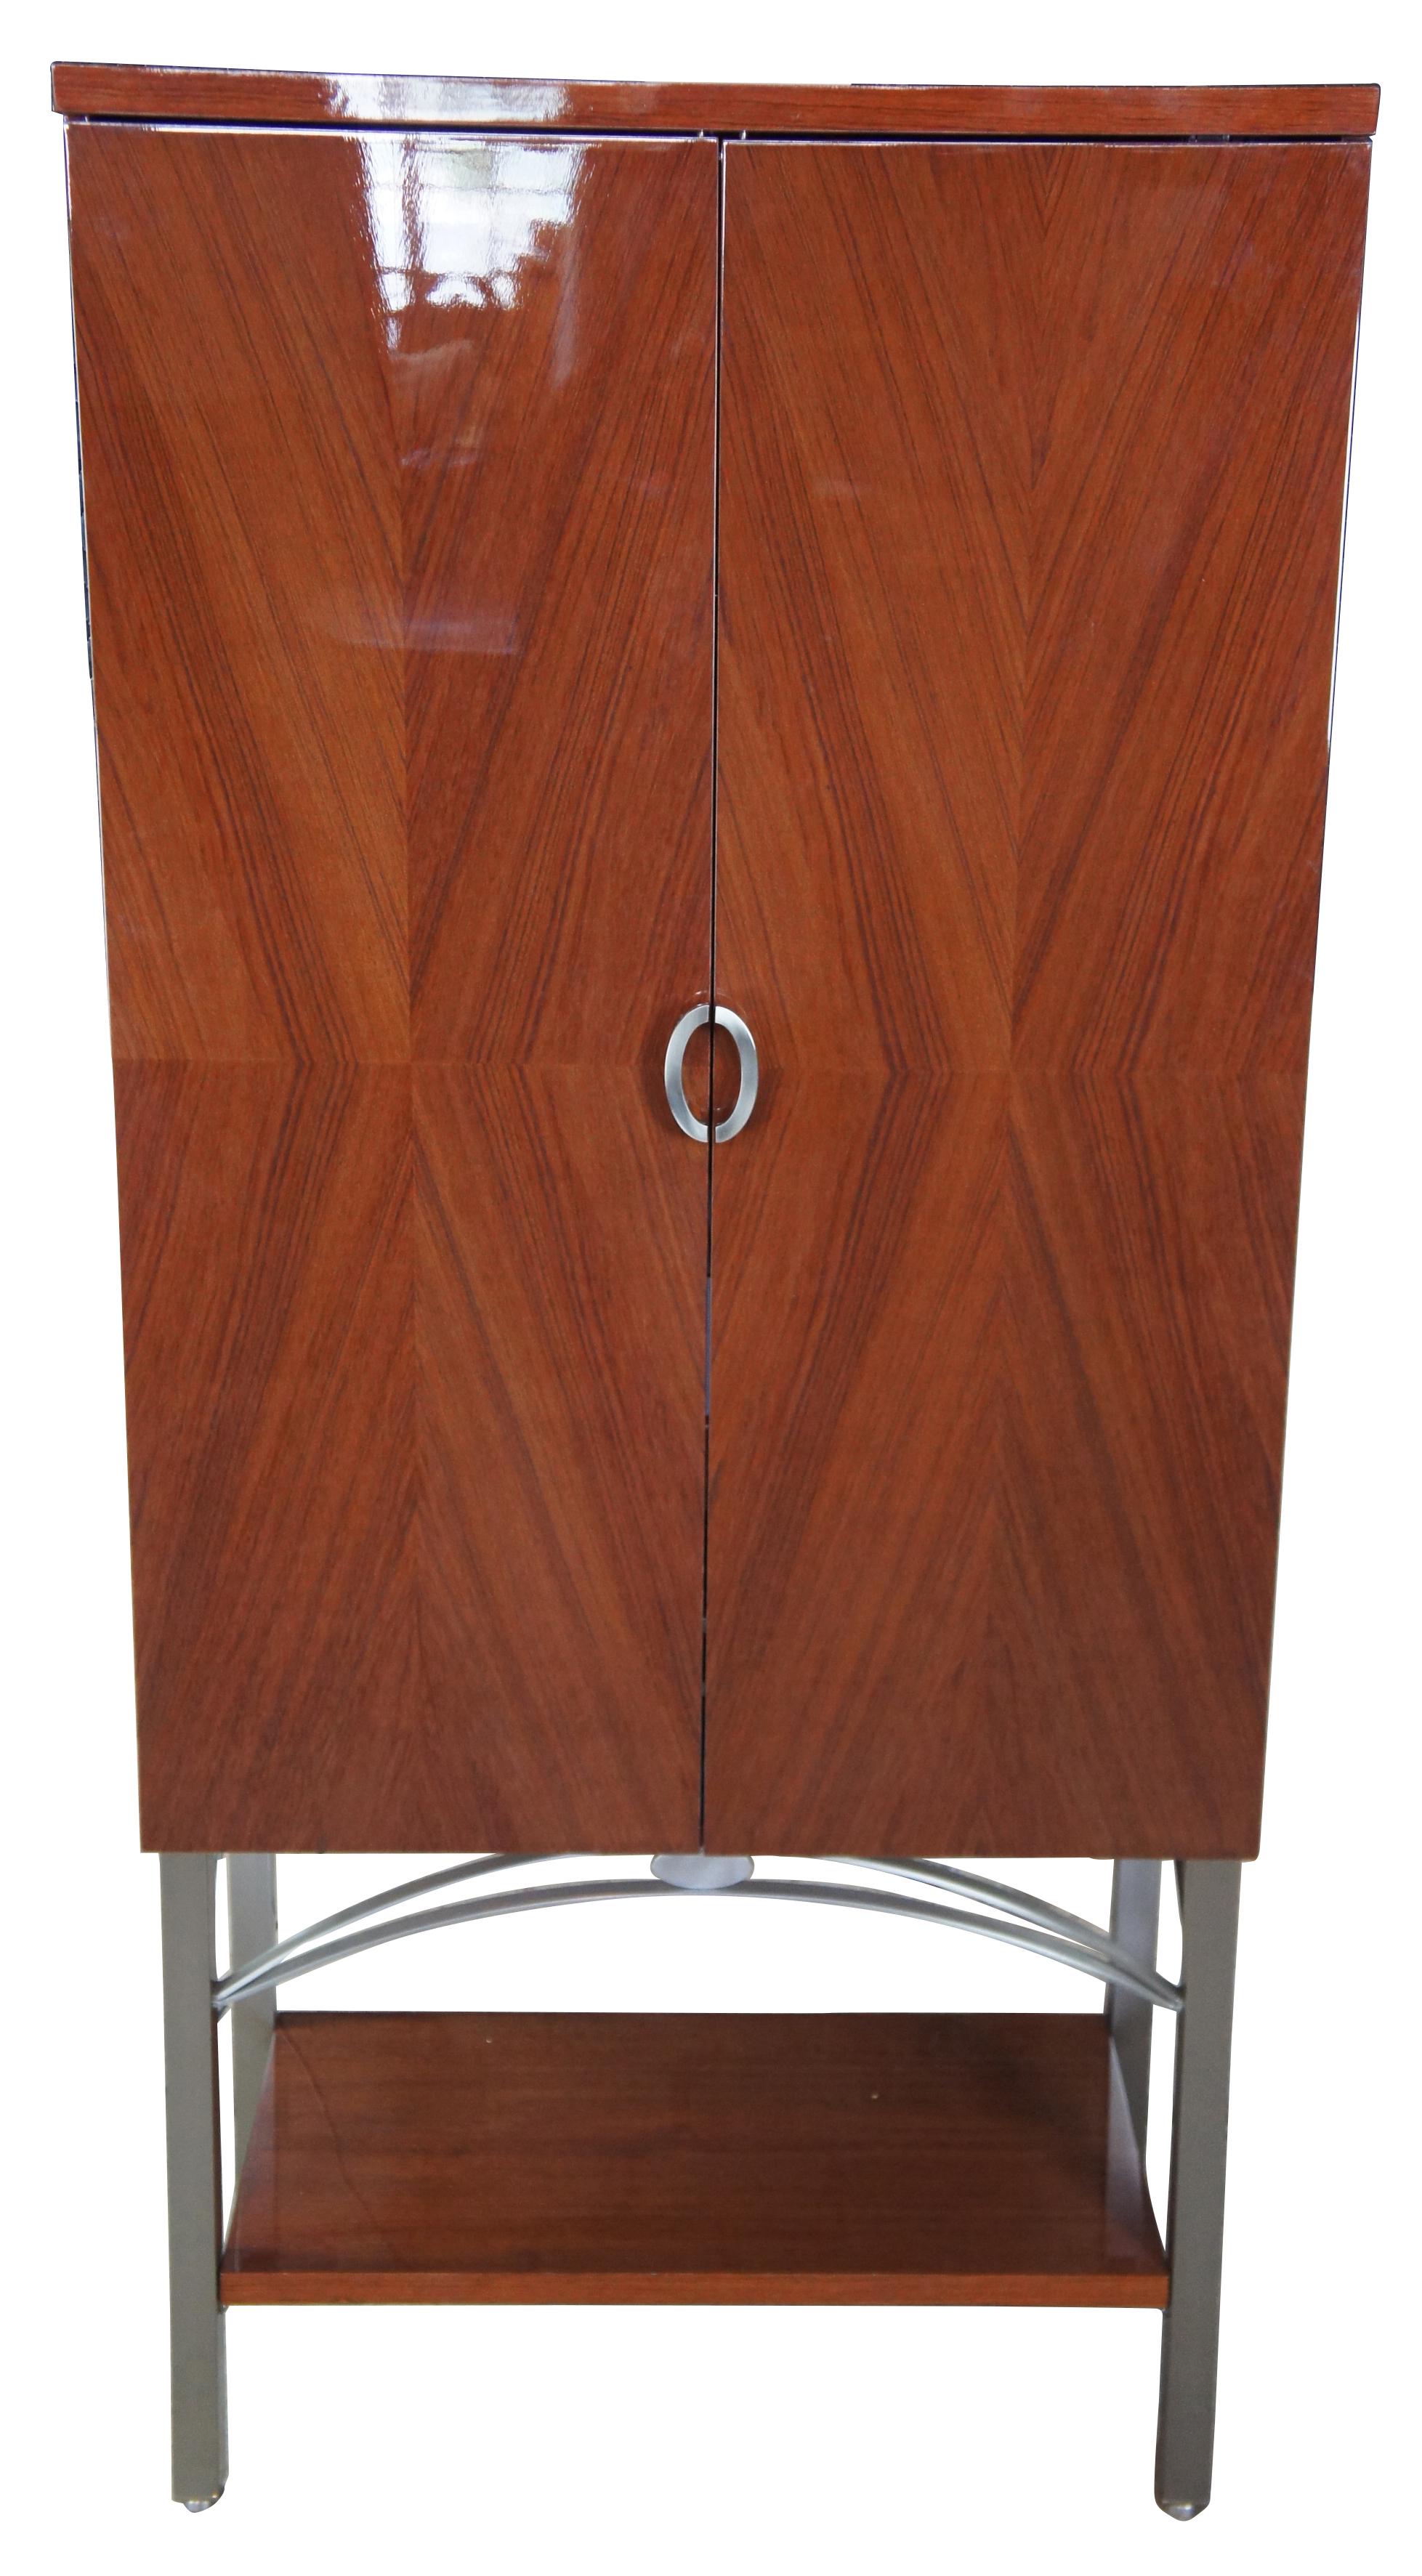 Excelsior designs contemporary lacquered rosewood and steel dry bar, circa 1990. Features matchbook veneered door panels that open to illuminate two interior glass shelves, pull out tray, bottle storage and two drawers. Measures: 79